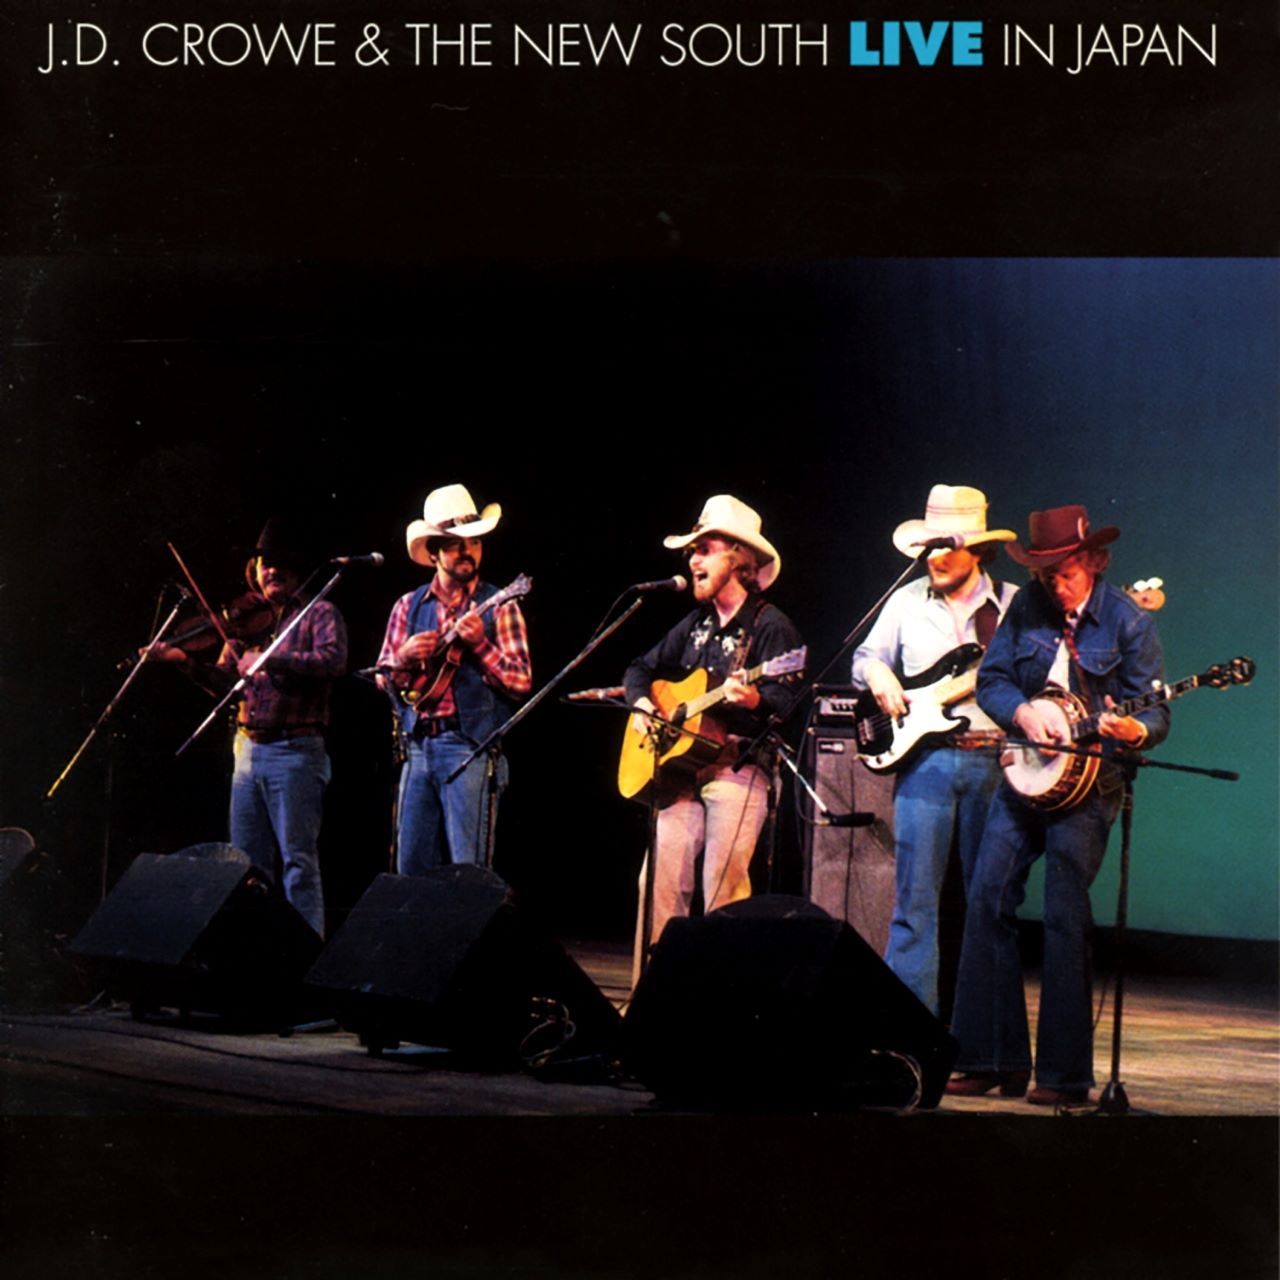 J.D. Crowe & The New South - Live in Japan cover album